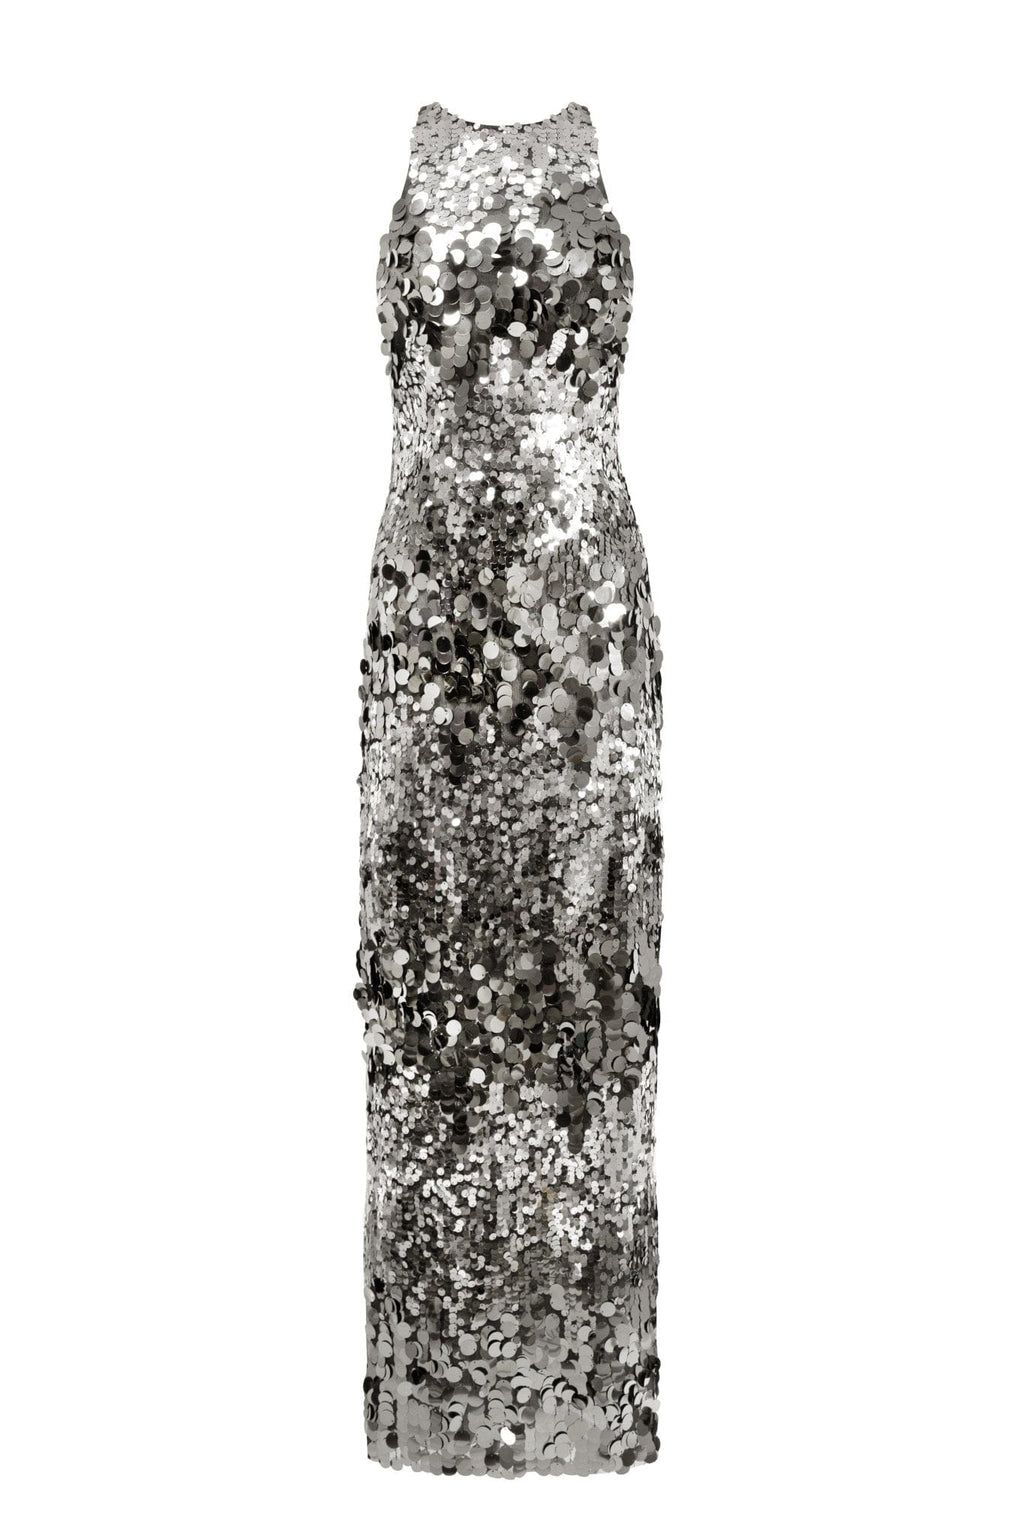 Lumière maxi dress covered in sequins - Milla